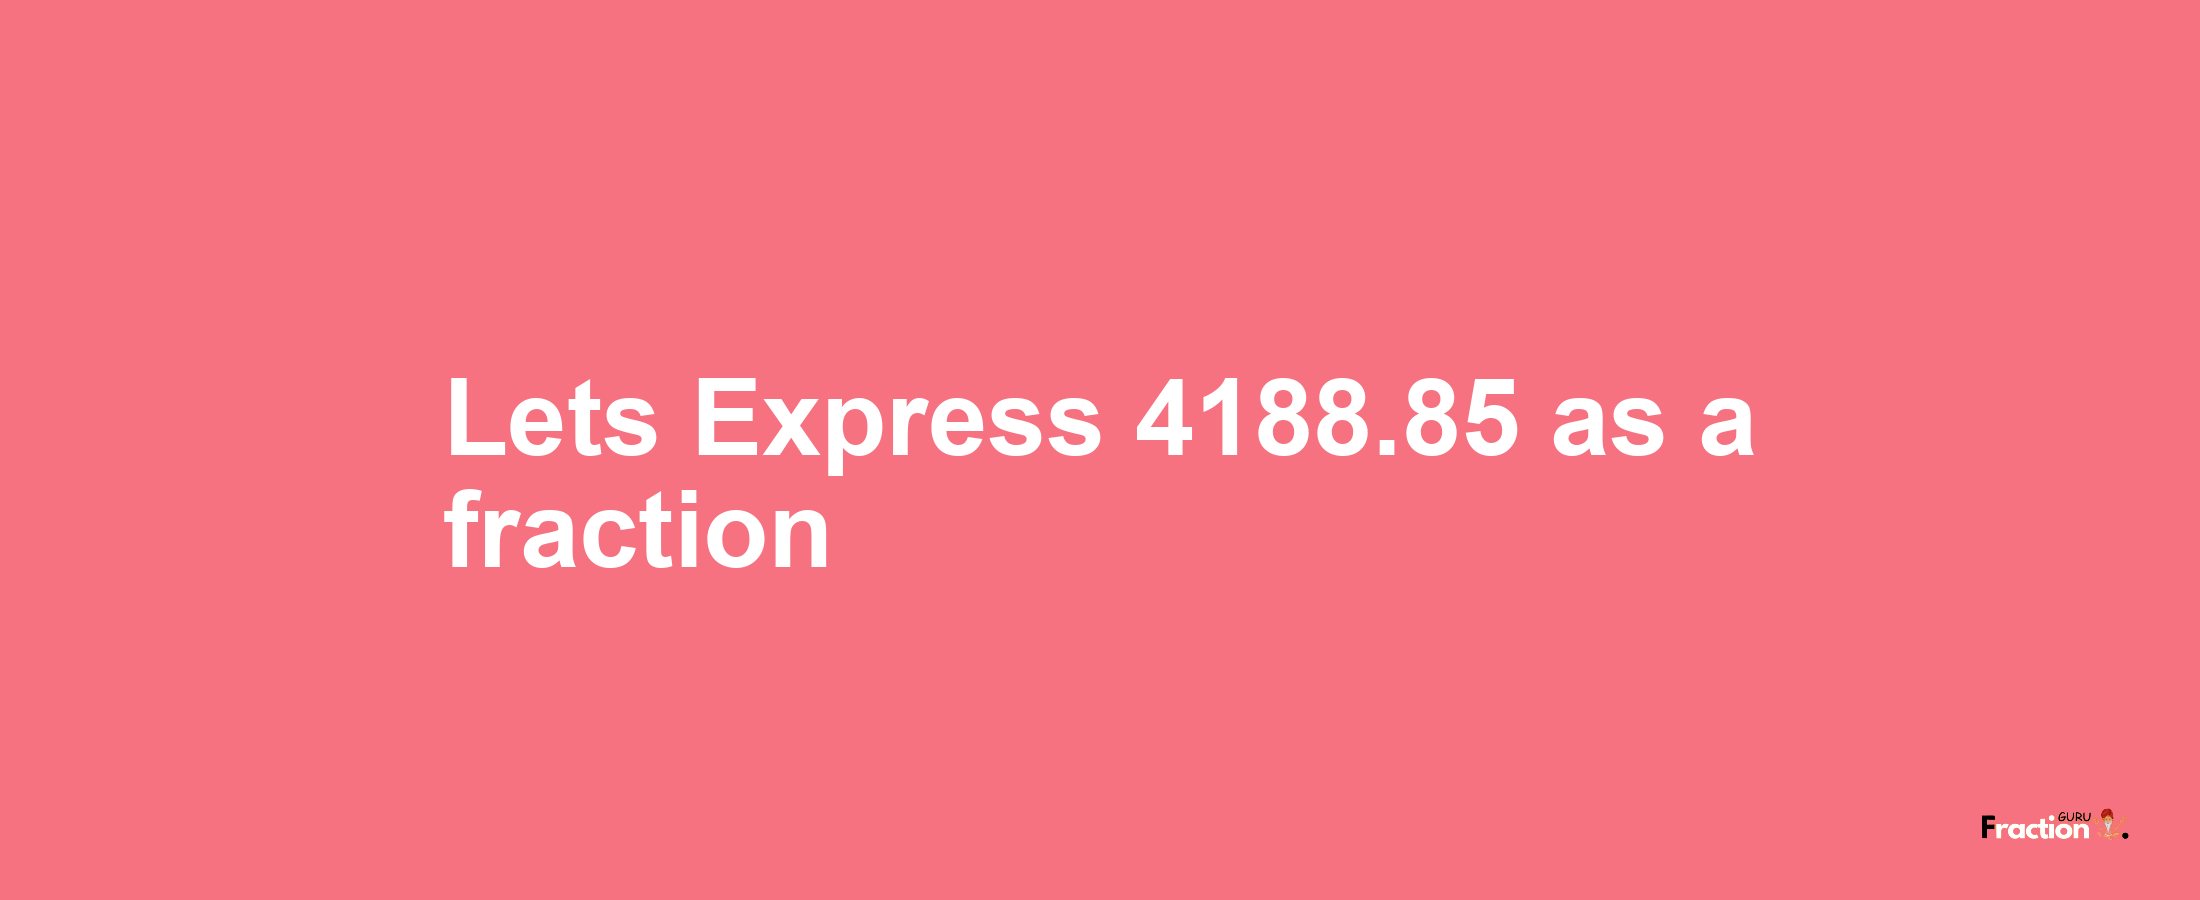 Lets Express 4188.85 as afraction